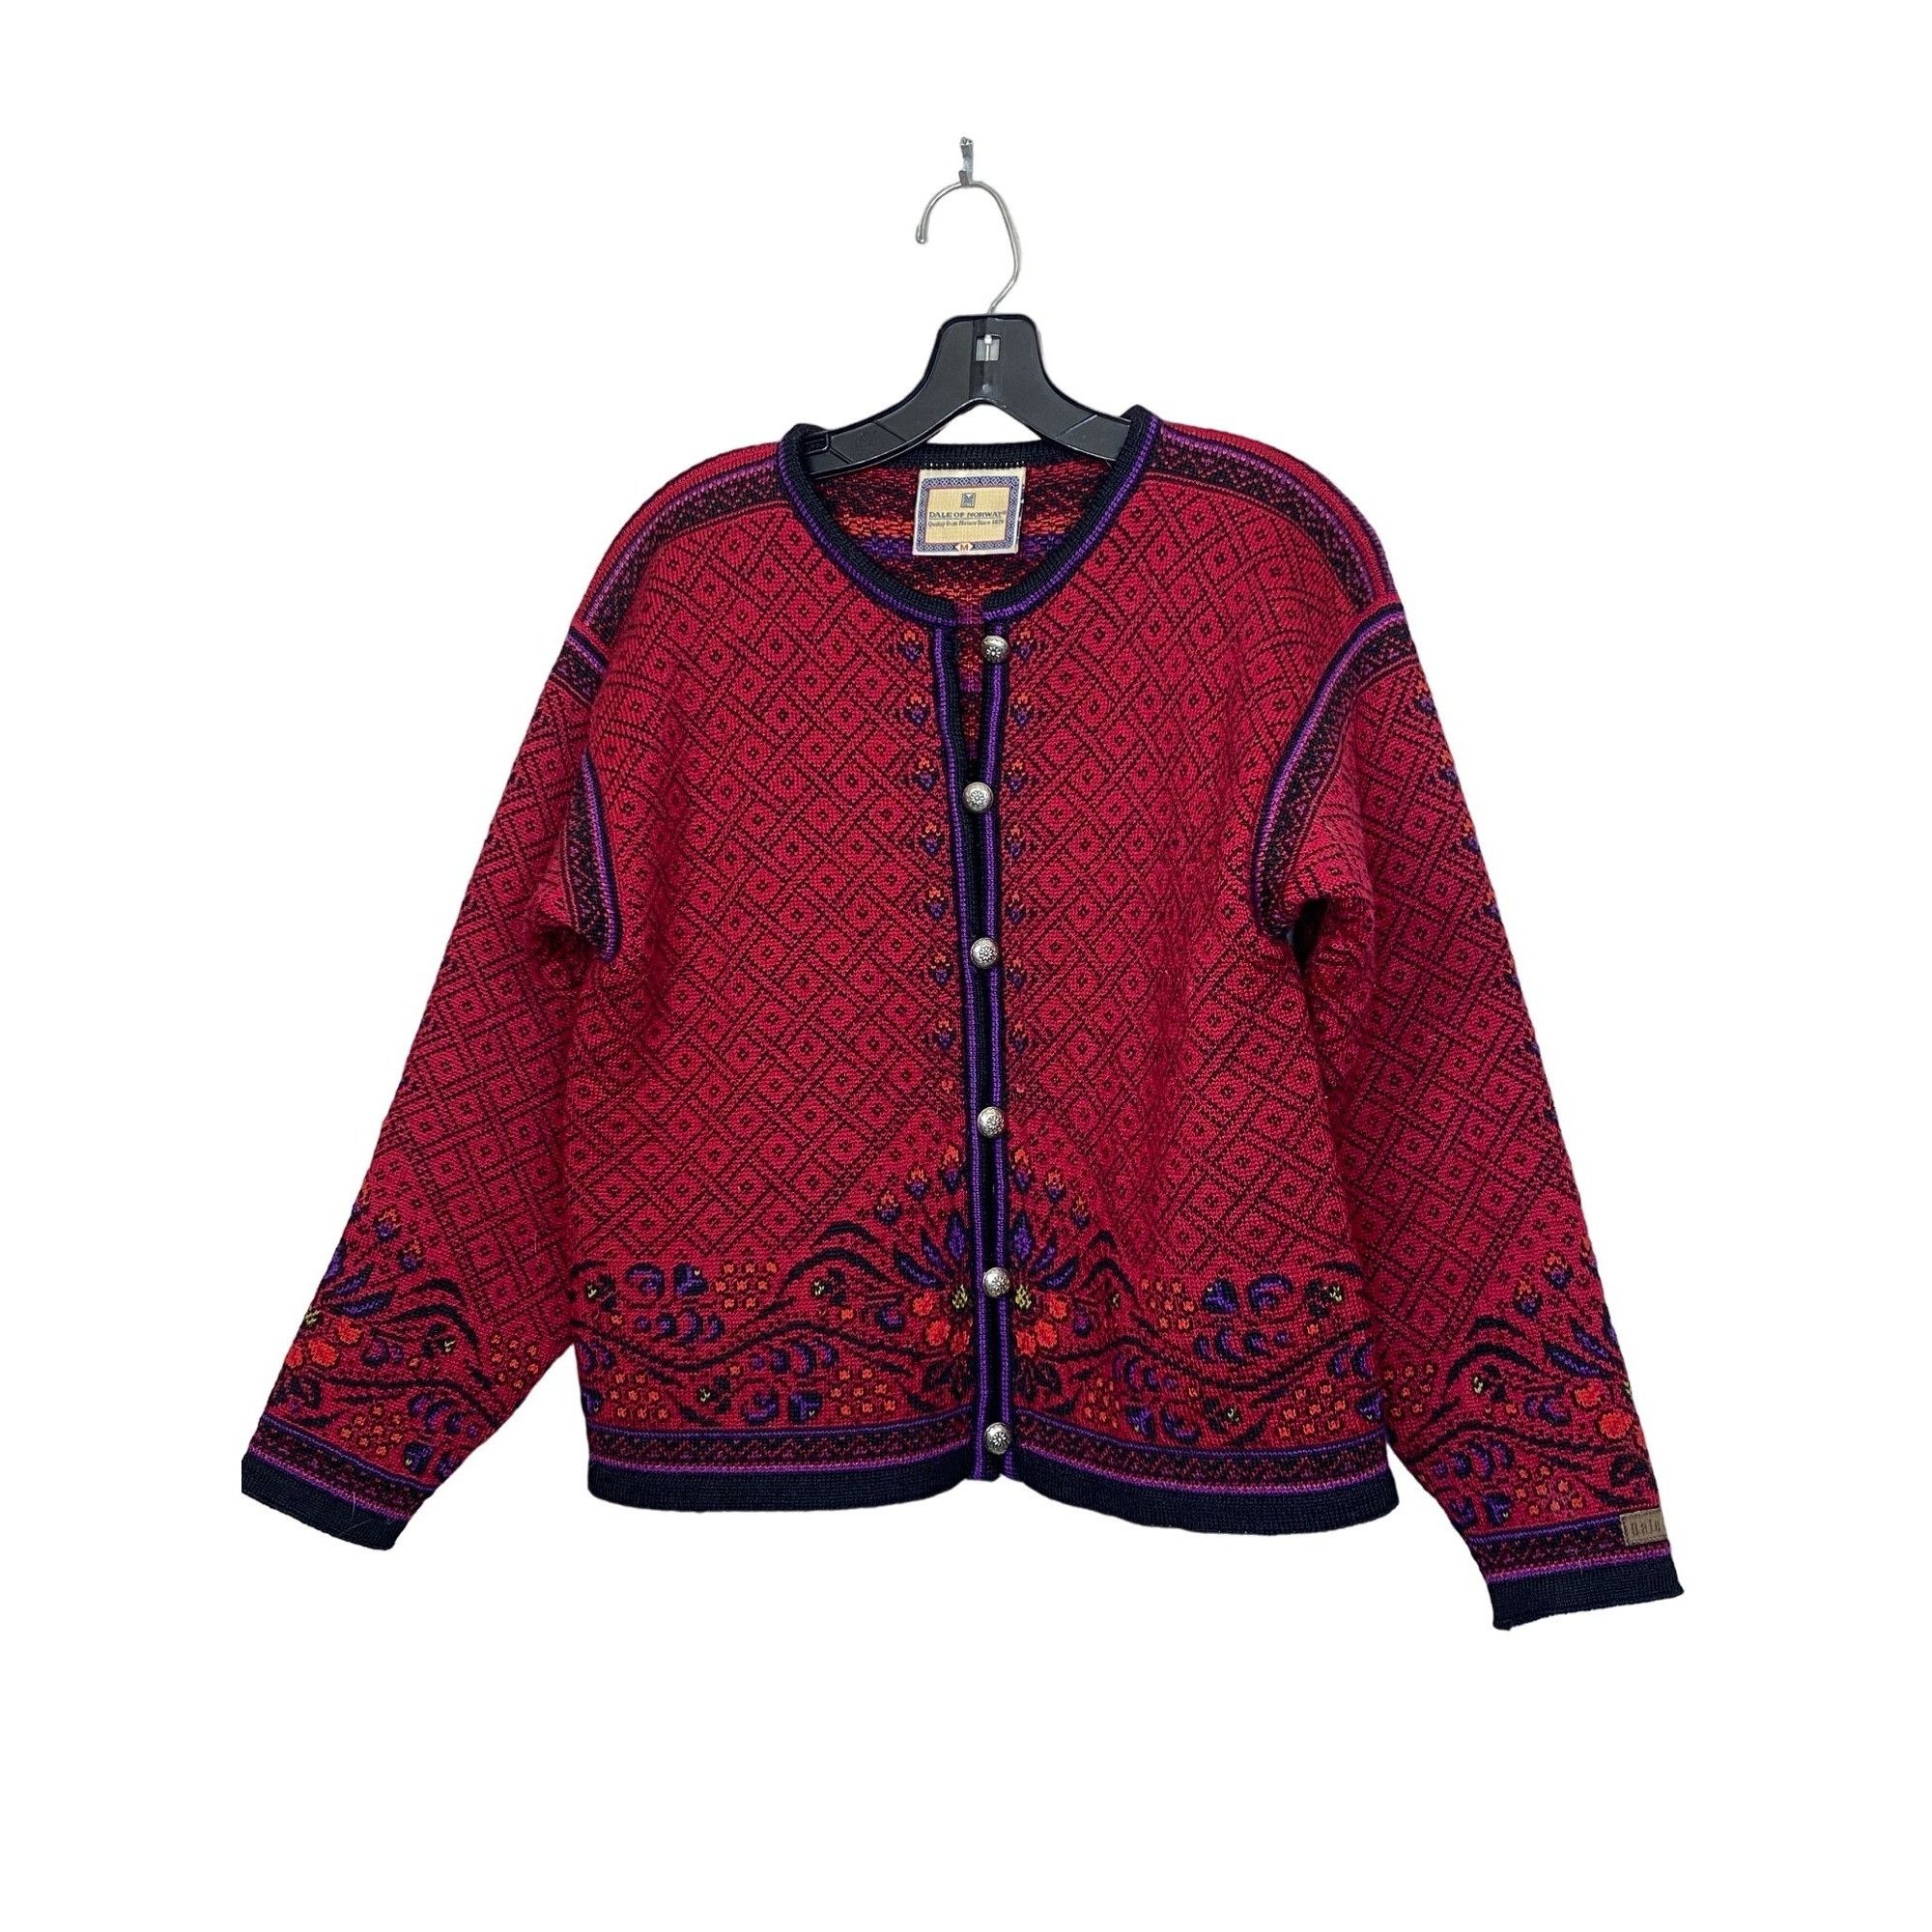 Dale Of Norway Dale of Norway Wool Cardigan Sweater Red Purple Pewter Butto Size M / US 6-8 / IT 42-44 - 2 Preview